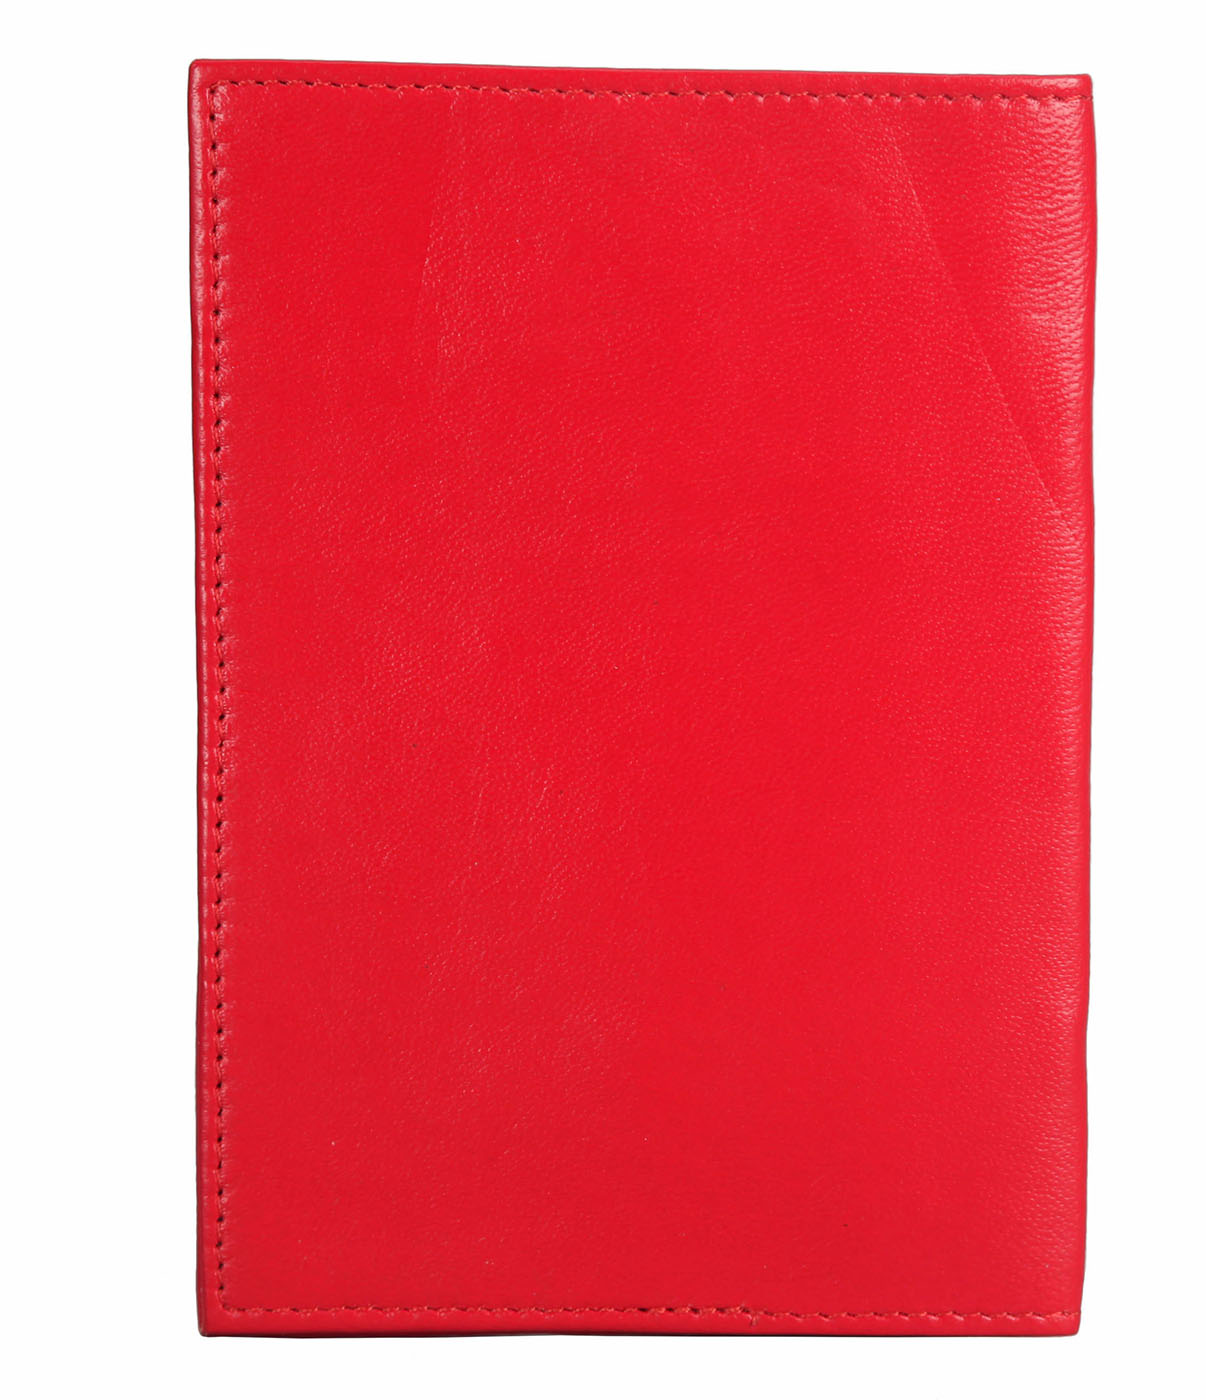 Travel Essential--Passport cover in Genuine Leather - Red